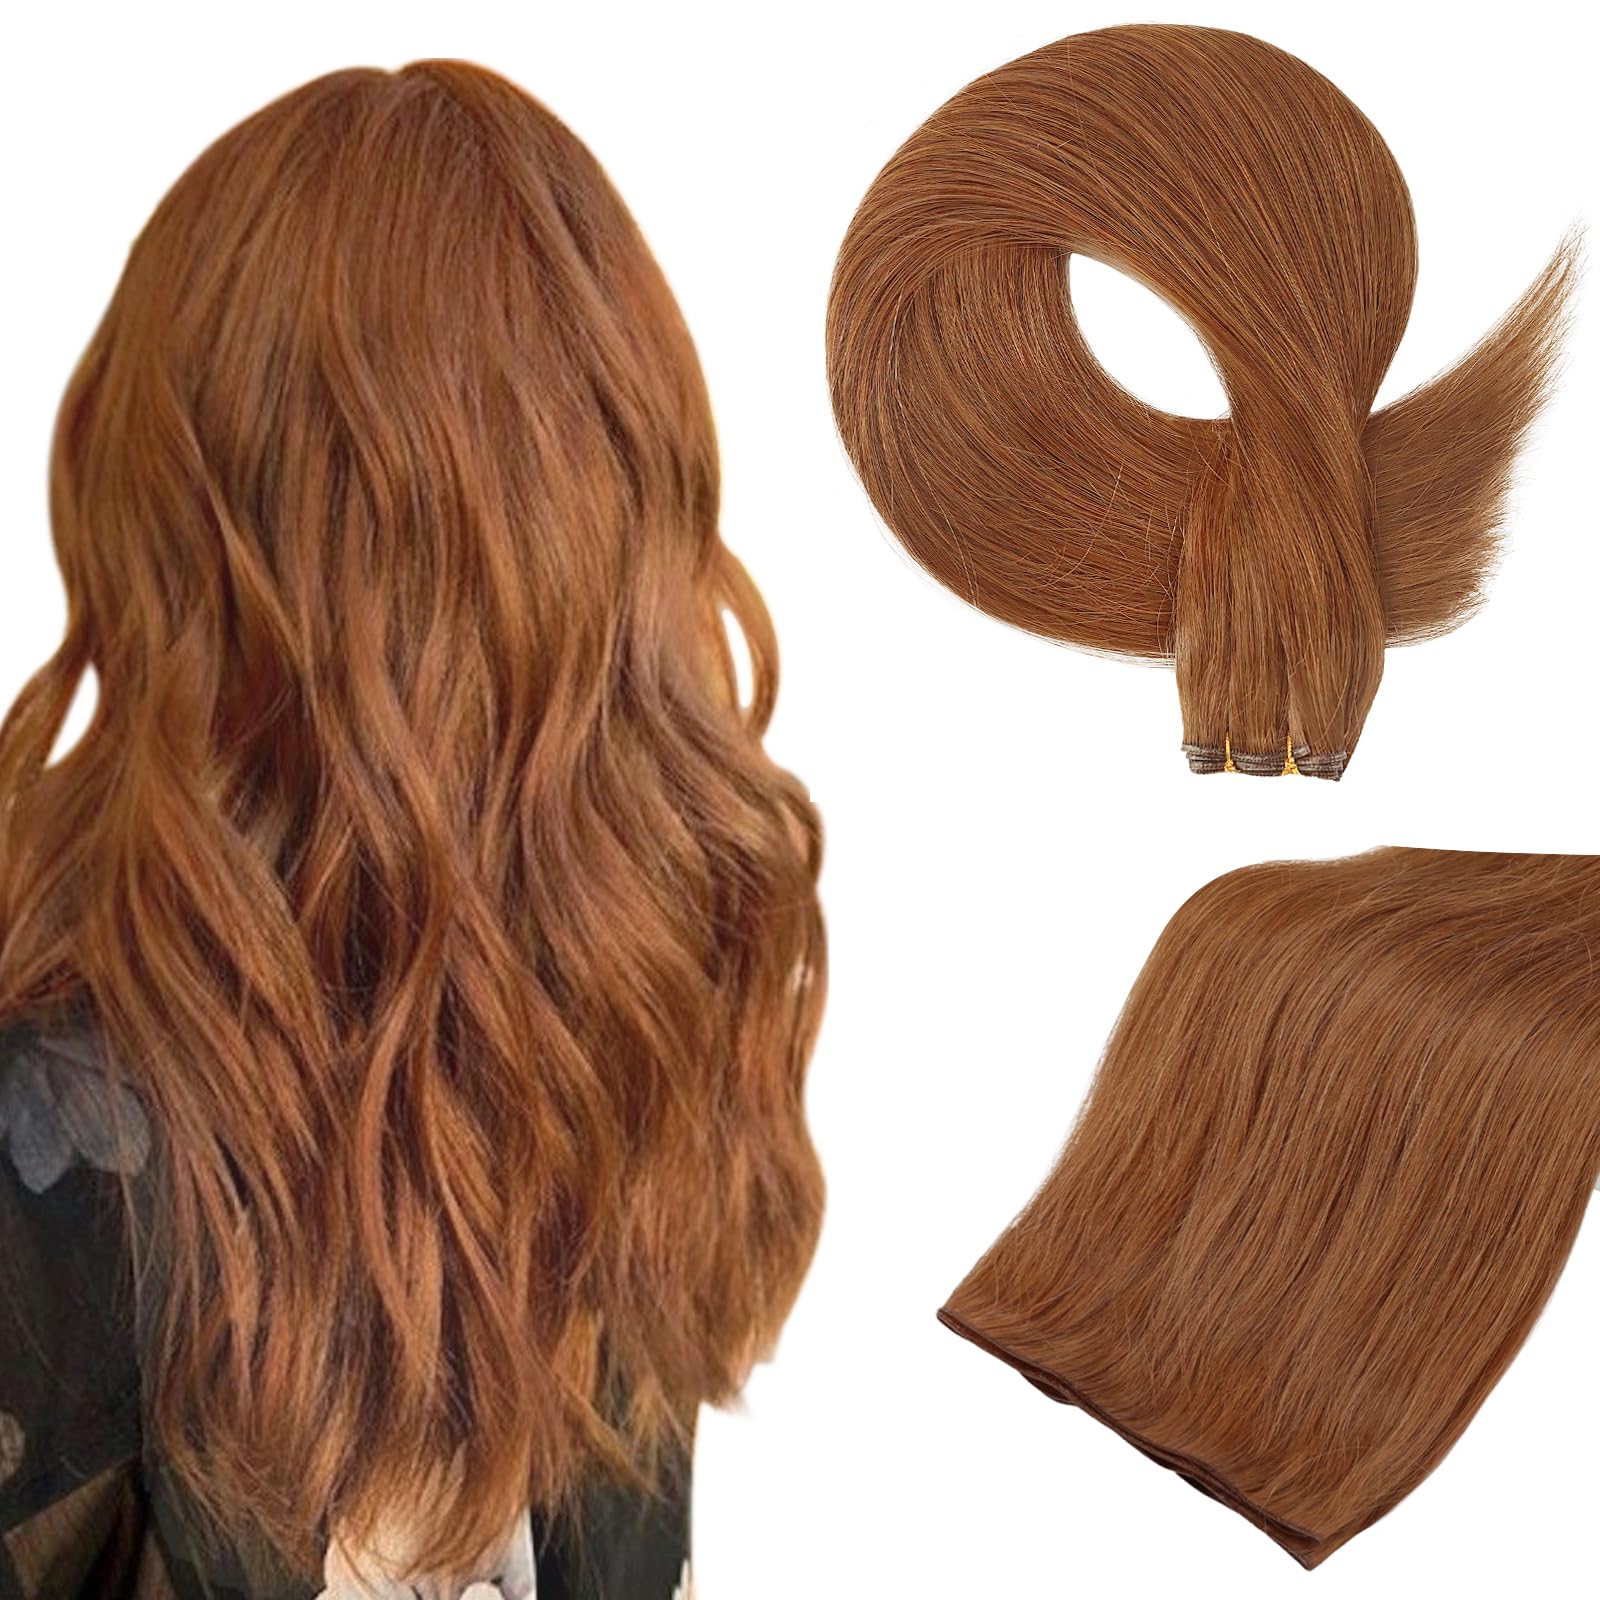 Full Shine Genius Weft Hair Extensions Hand Tied Hair Extensions Real Human Hair Copper Sew In Weft Hair Extensions For Women Invisible Weft Extensions Remy Hair 20 Inch 60G